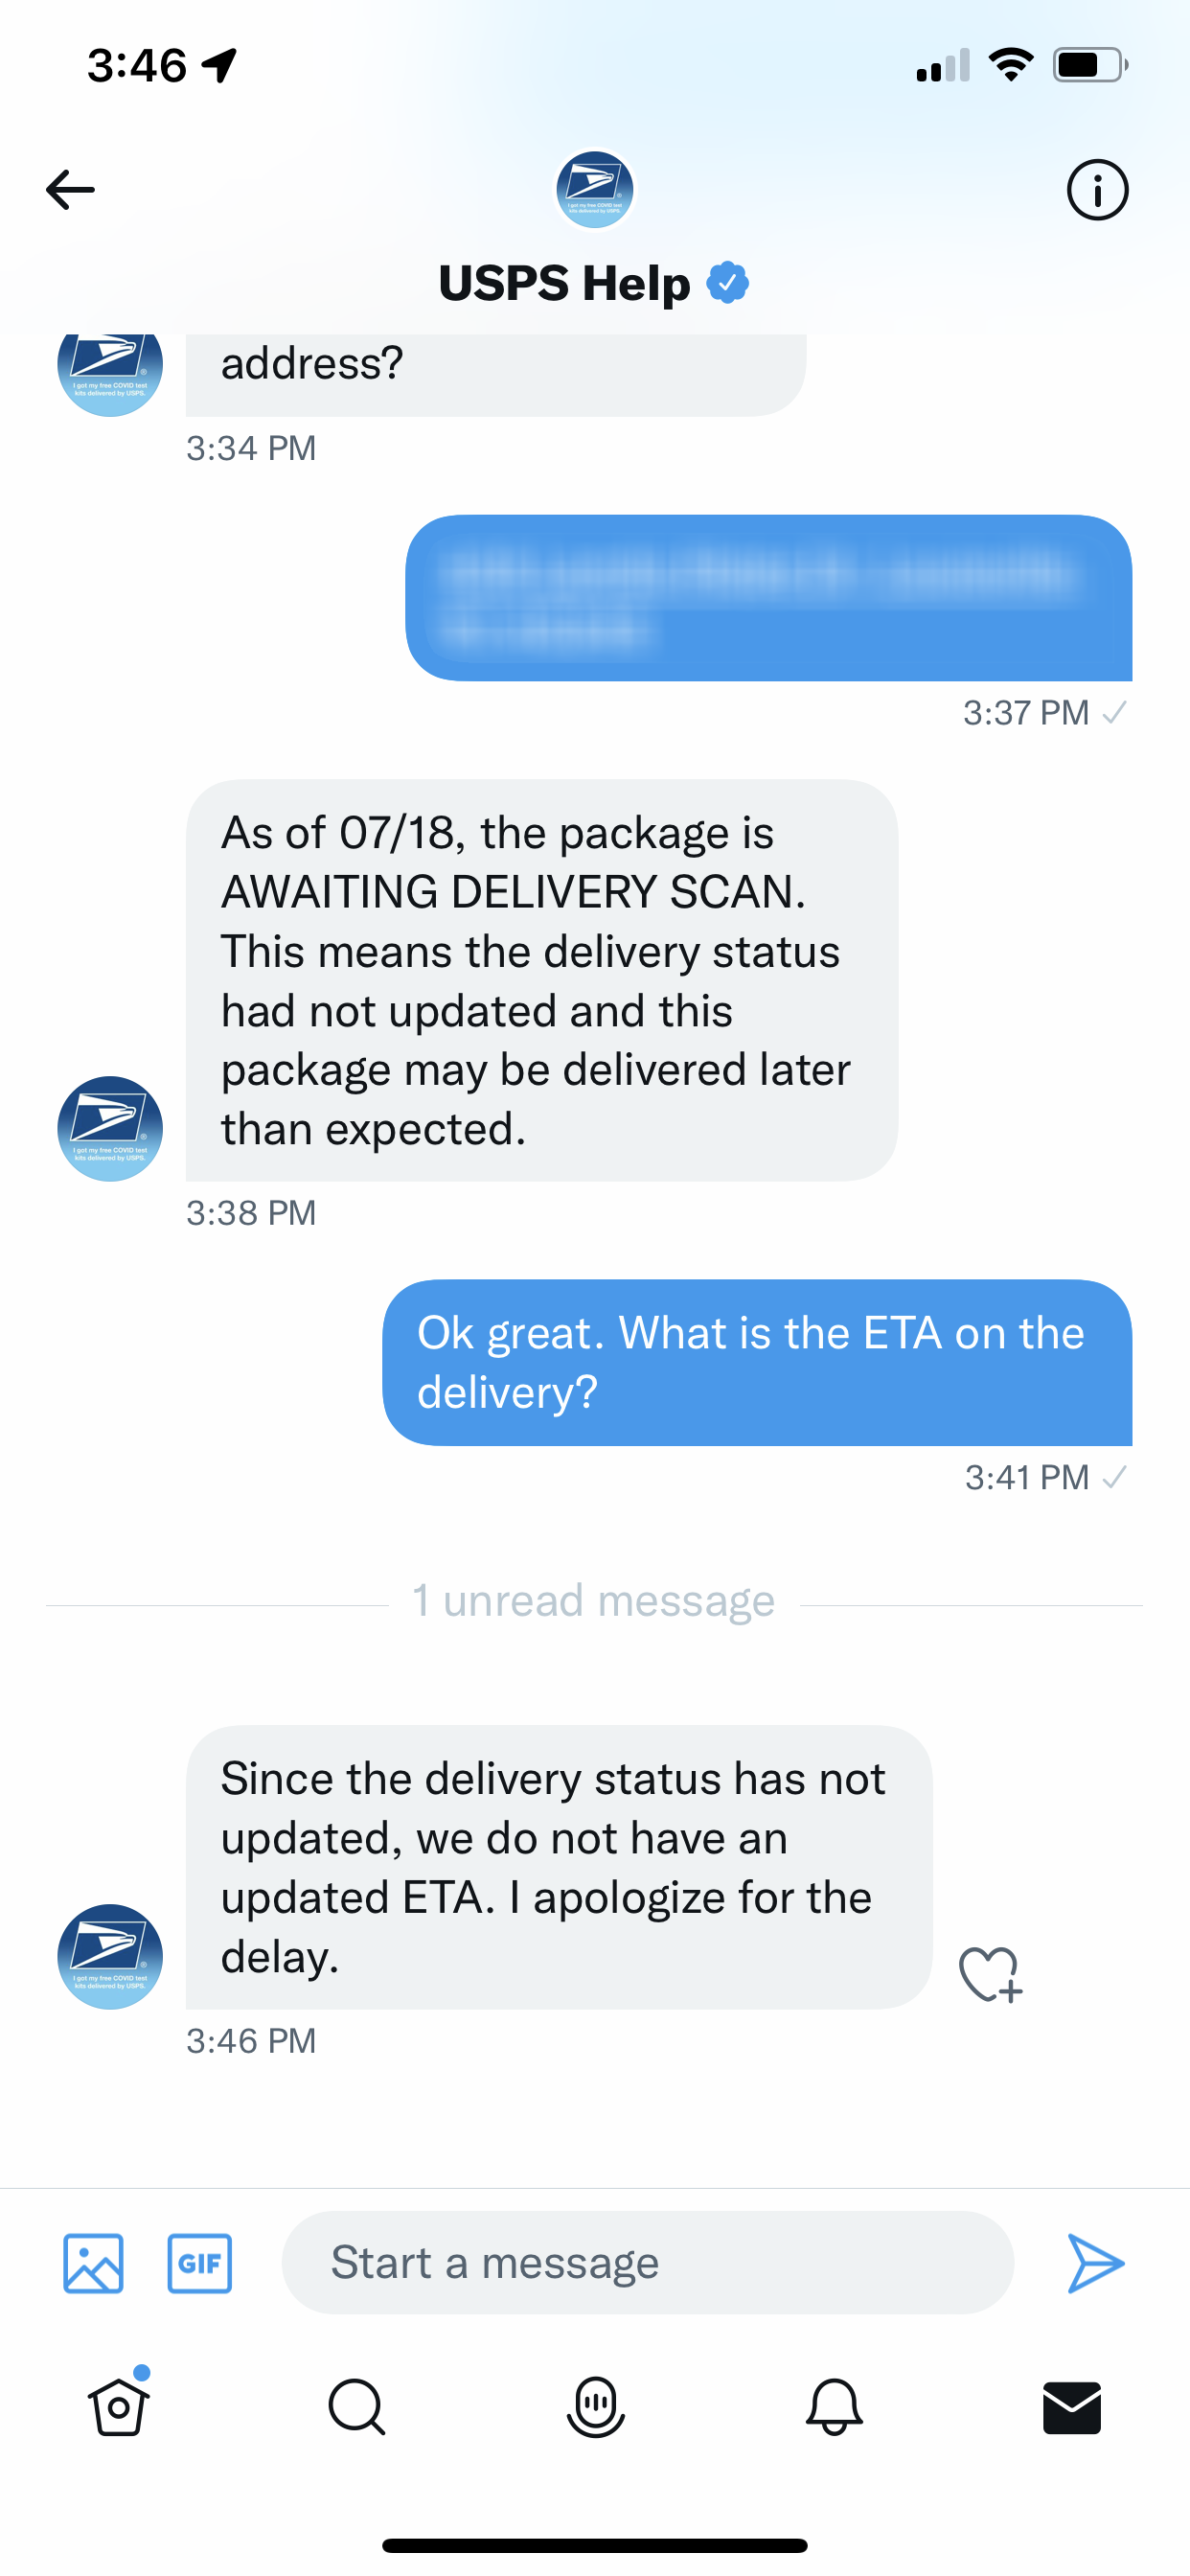 USPS Twitter Support